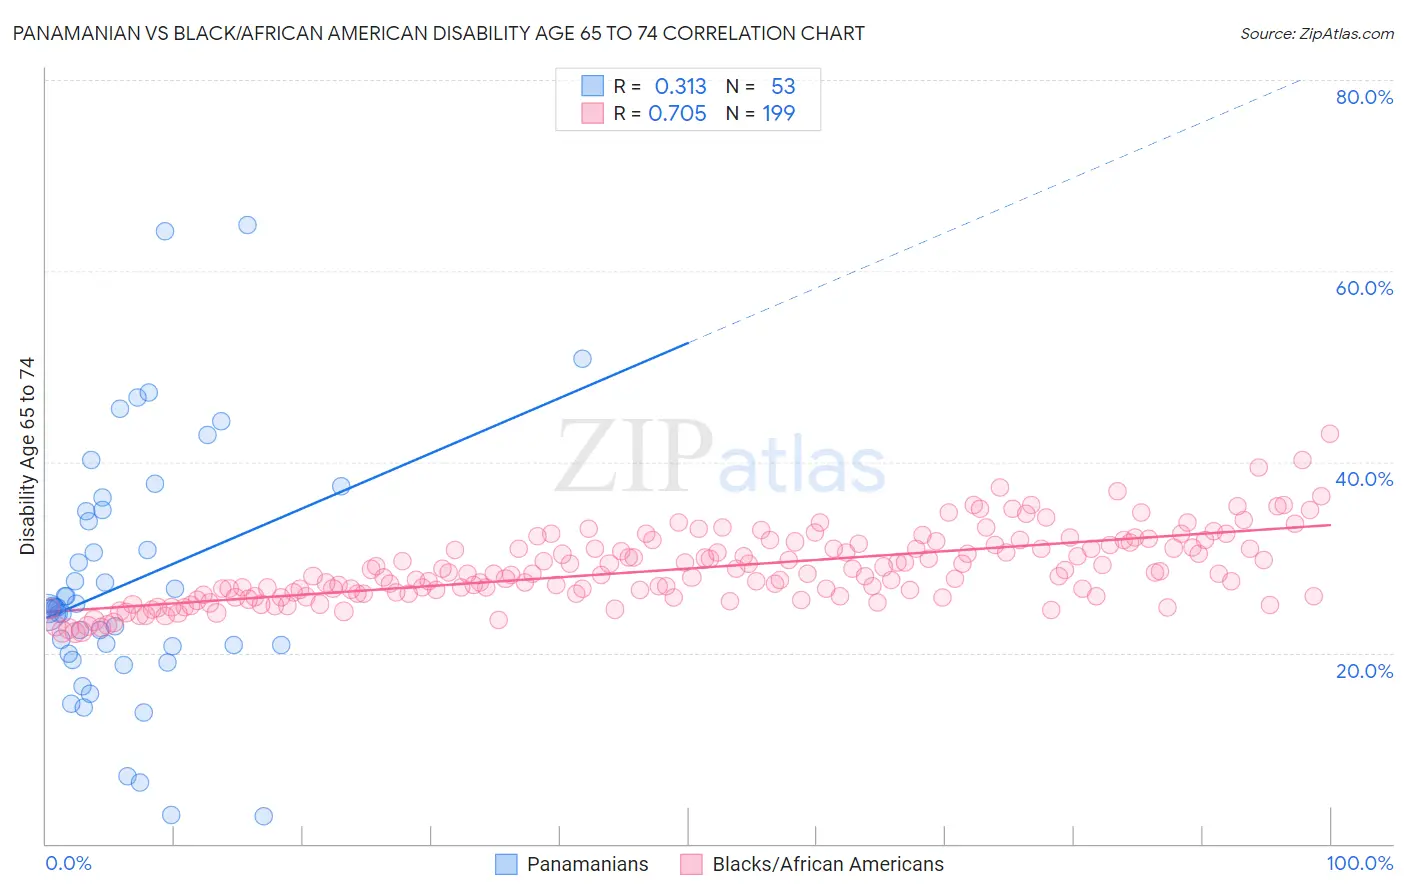 Panamanian vs Black/African American Disability Age 65 to 74